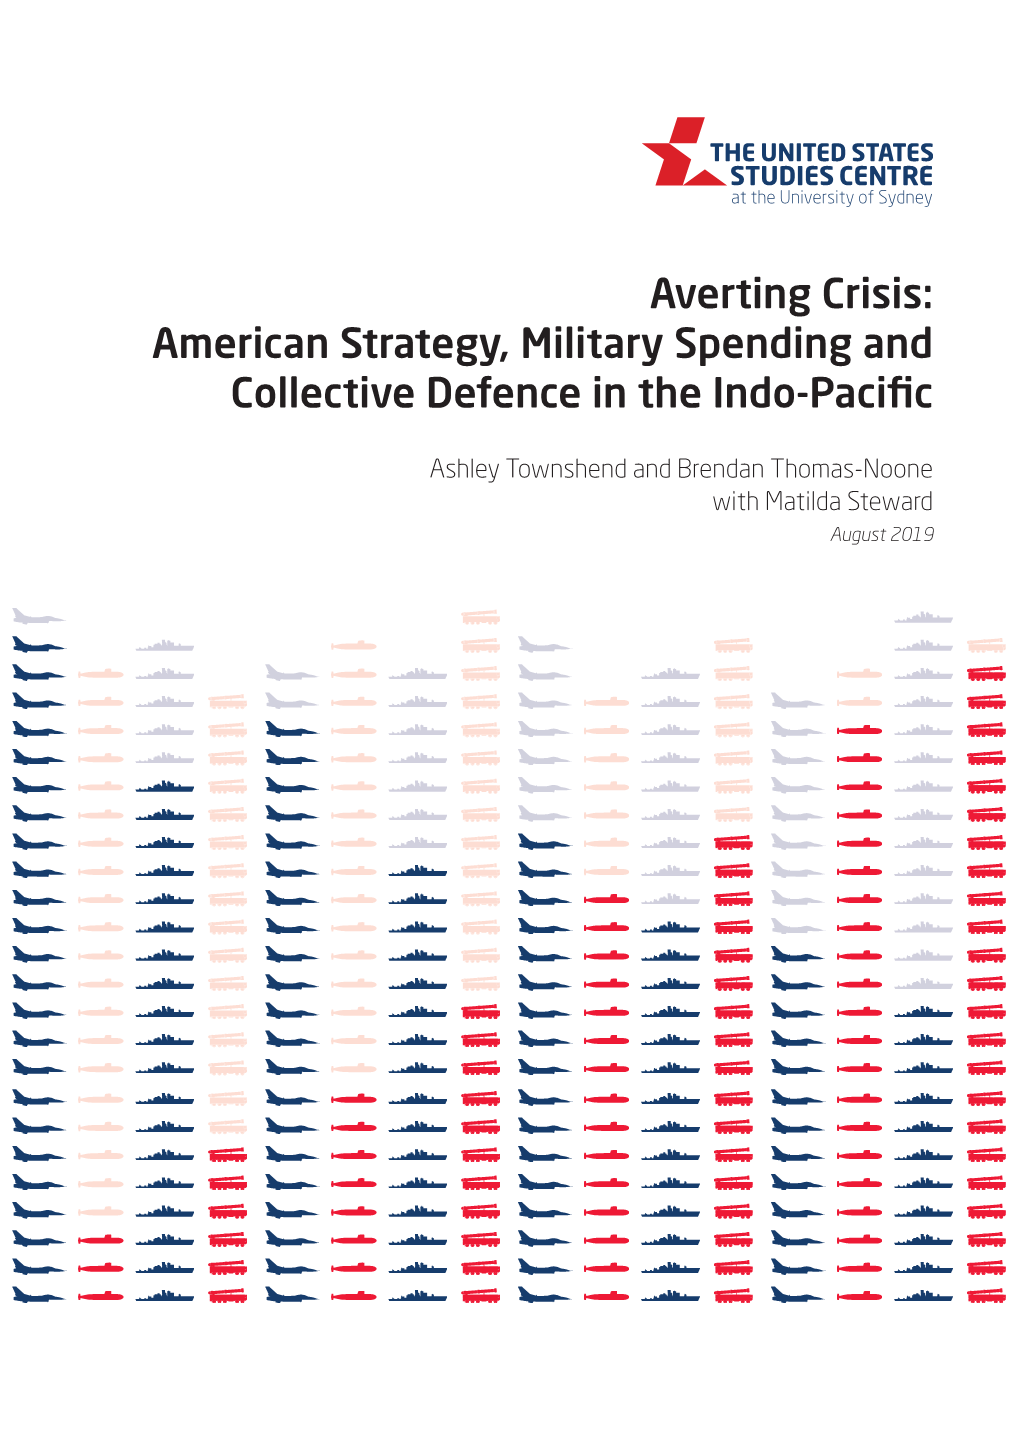 American Strategy, Military Spending and Collective Defence in the Indo-Pacific,” United States Studies Centre at the University of Sydney, August 2019